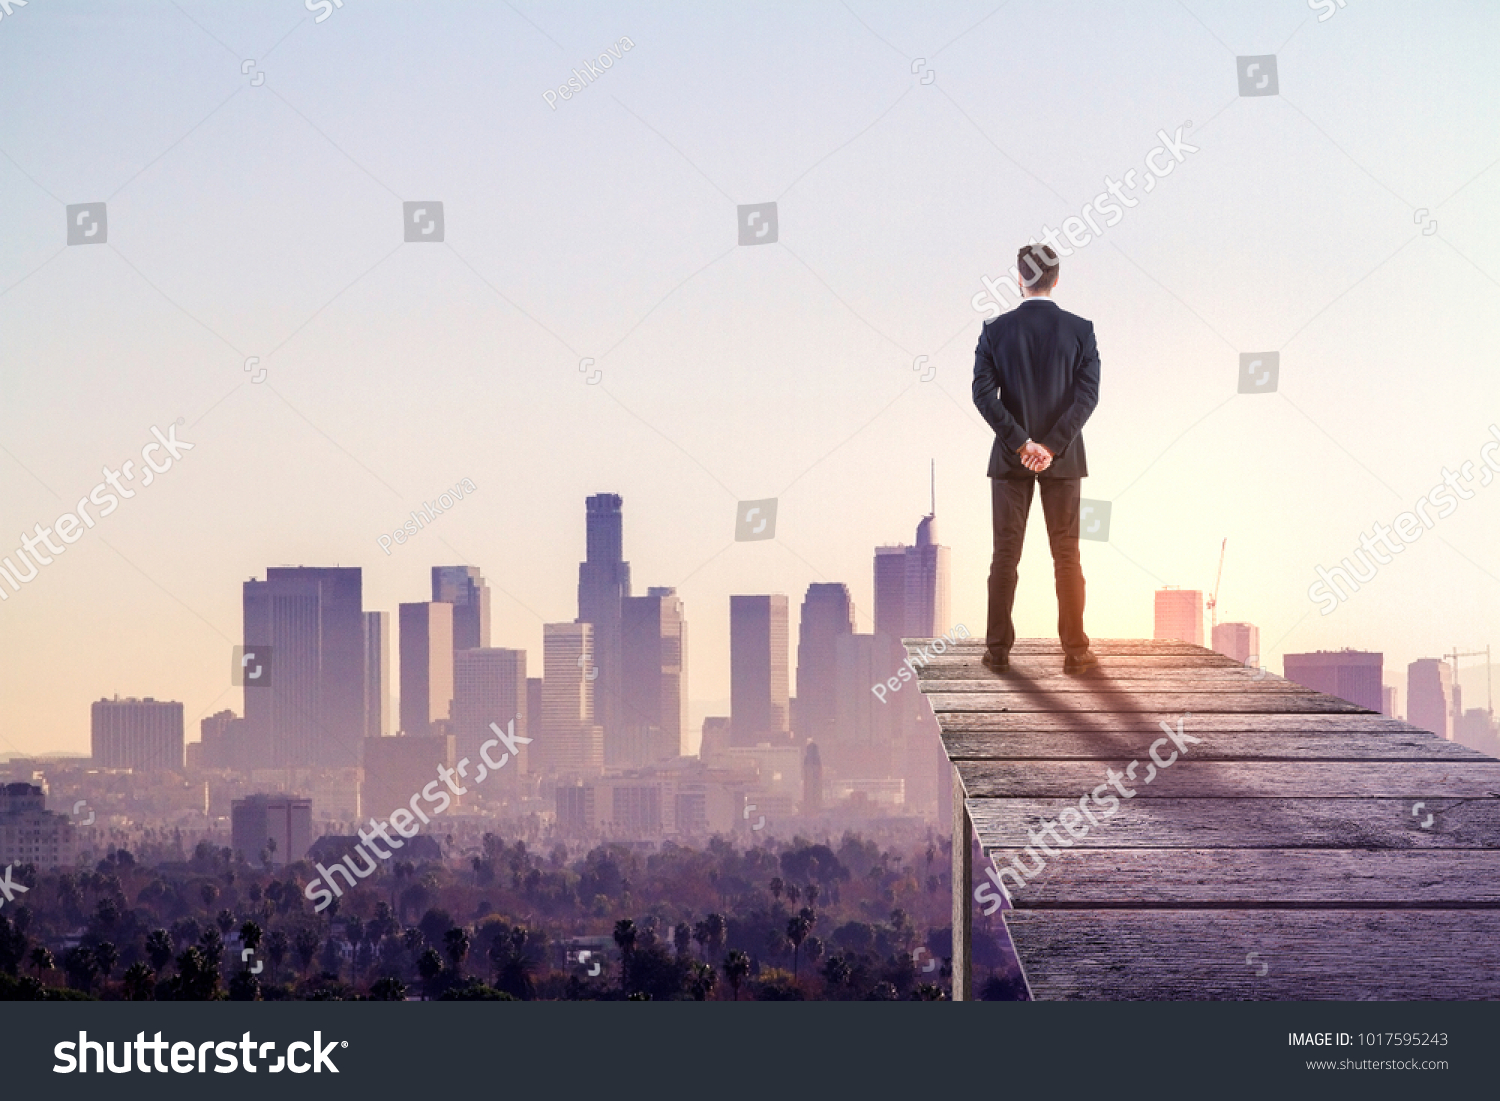 Thoughtful businessman on abstract city background. Research and employment concept #1017595243